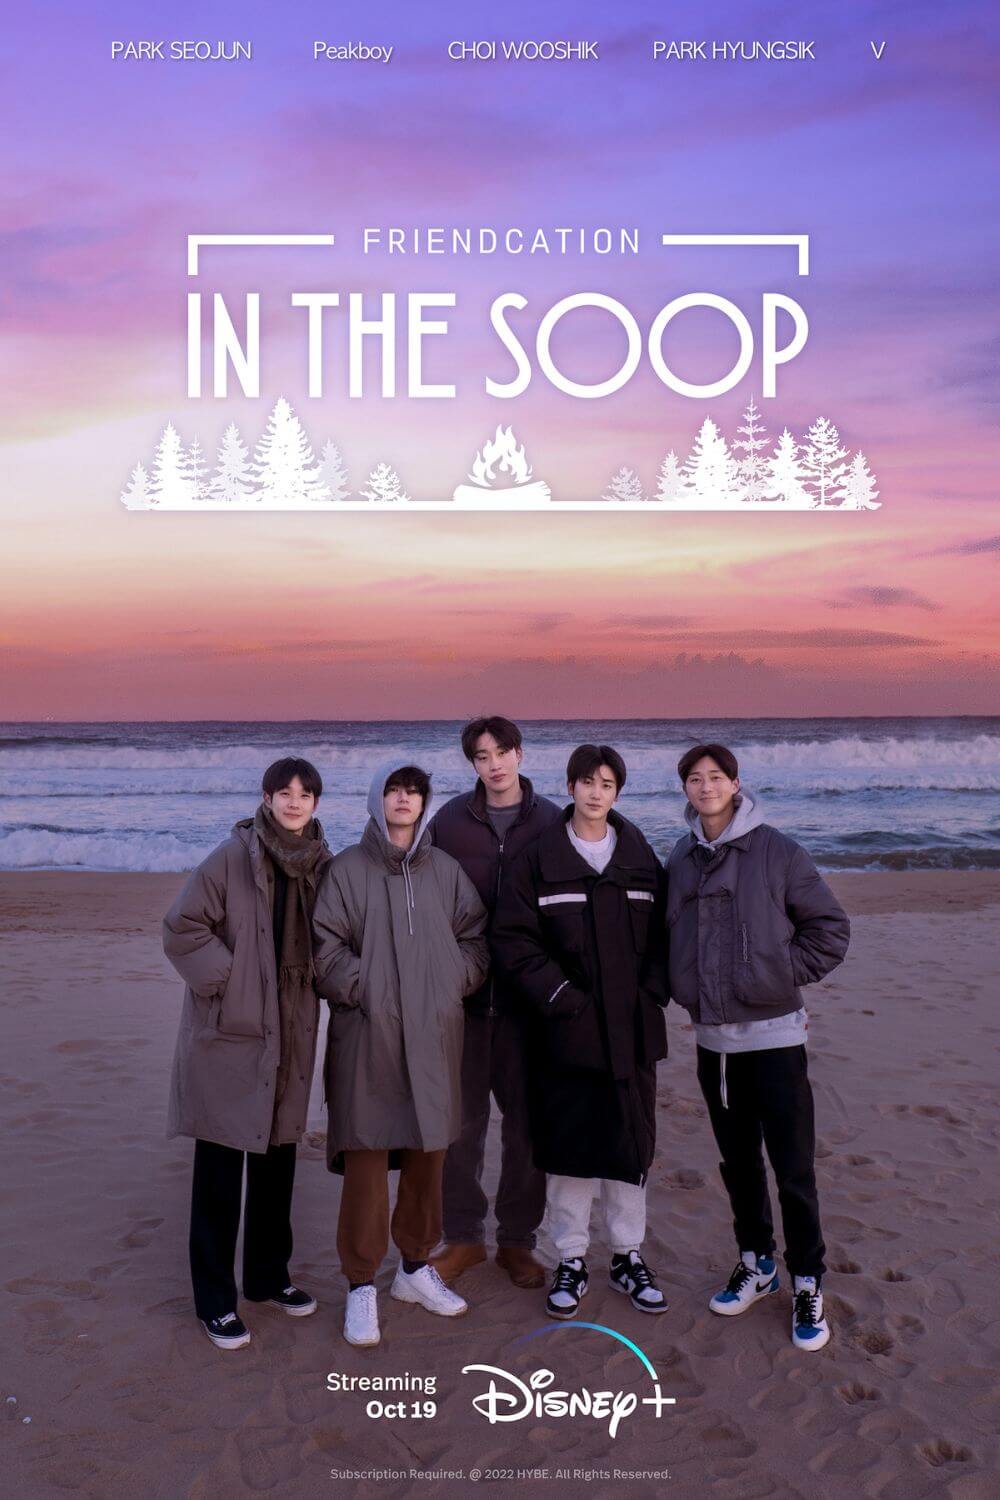 Promotional poster for the Disney+ reality show, In the Soop: Friendcation, featuring Park Seo-jun, Peakboy, Choi Woo-Shik, Park Hyung-sik, and V.